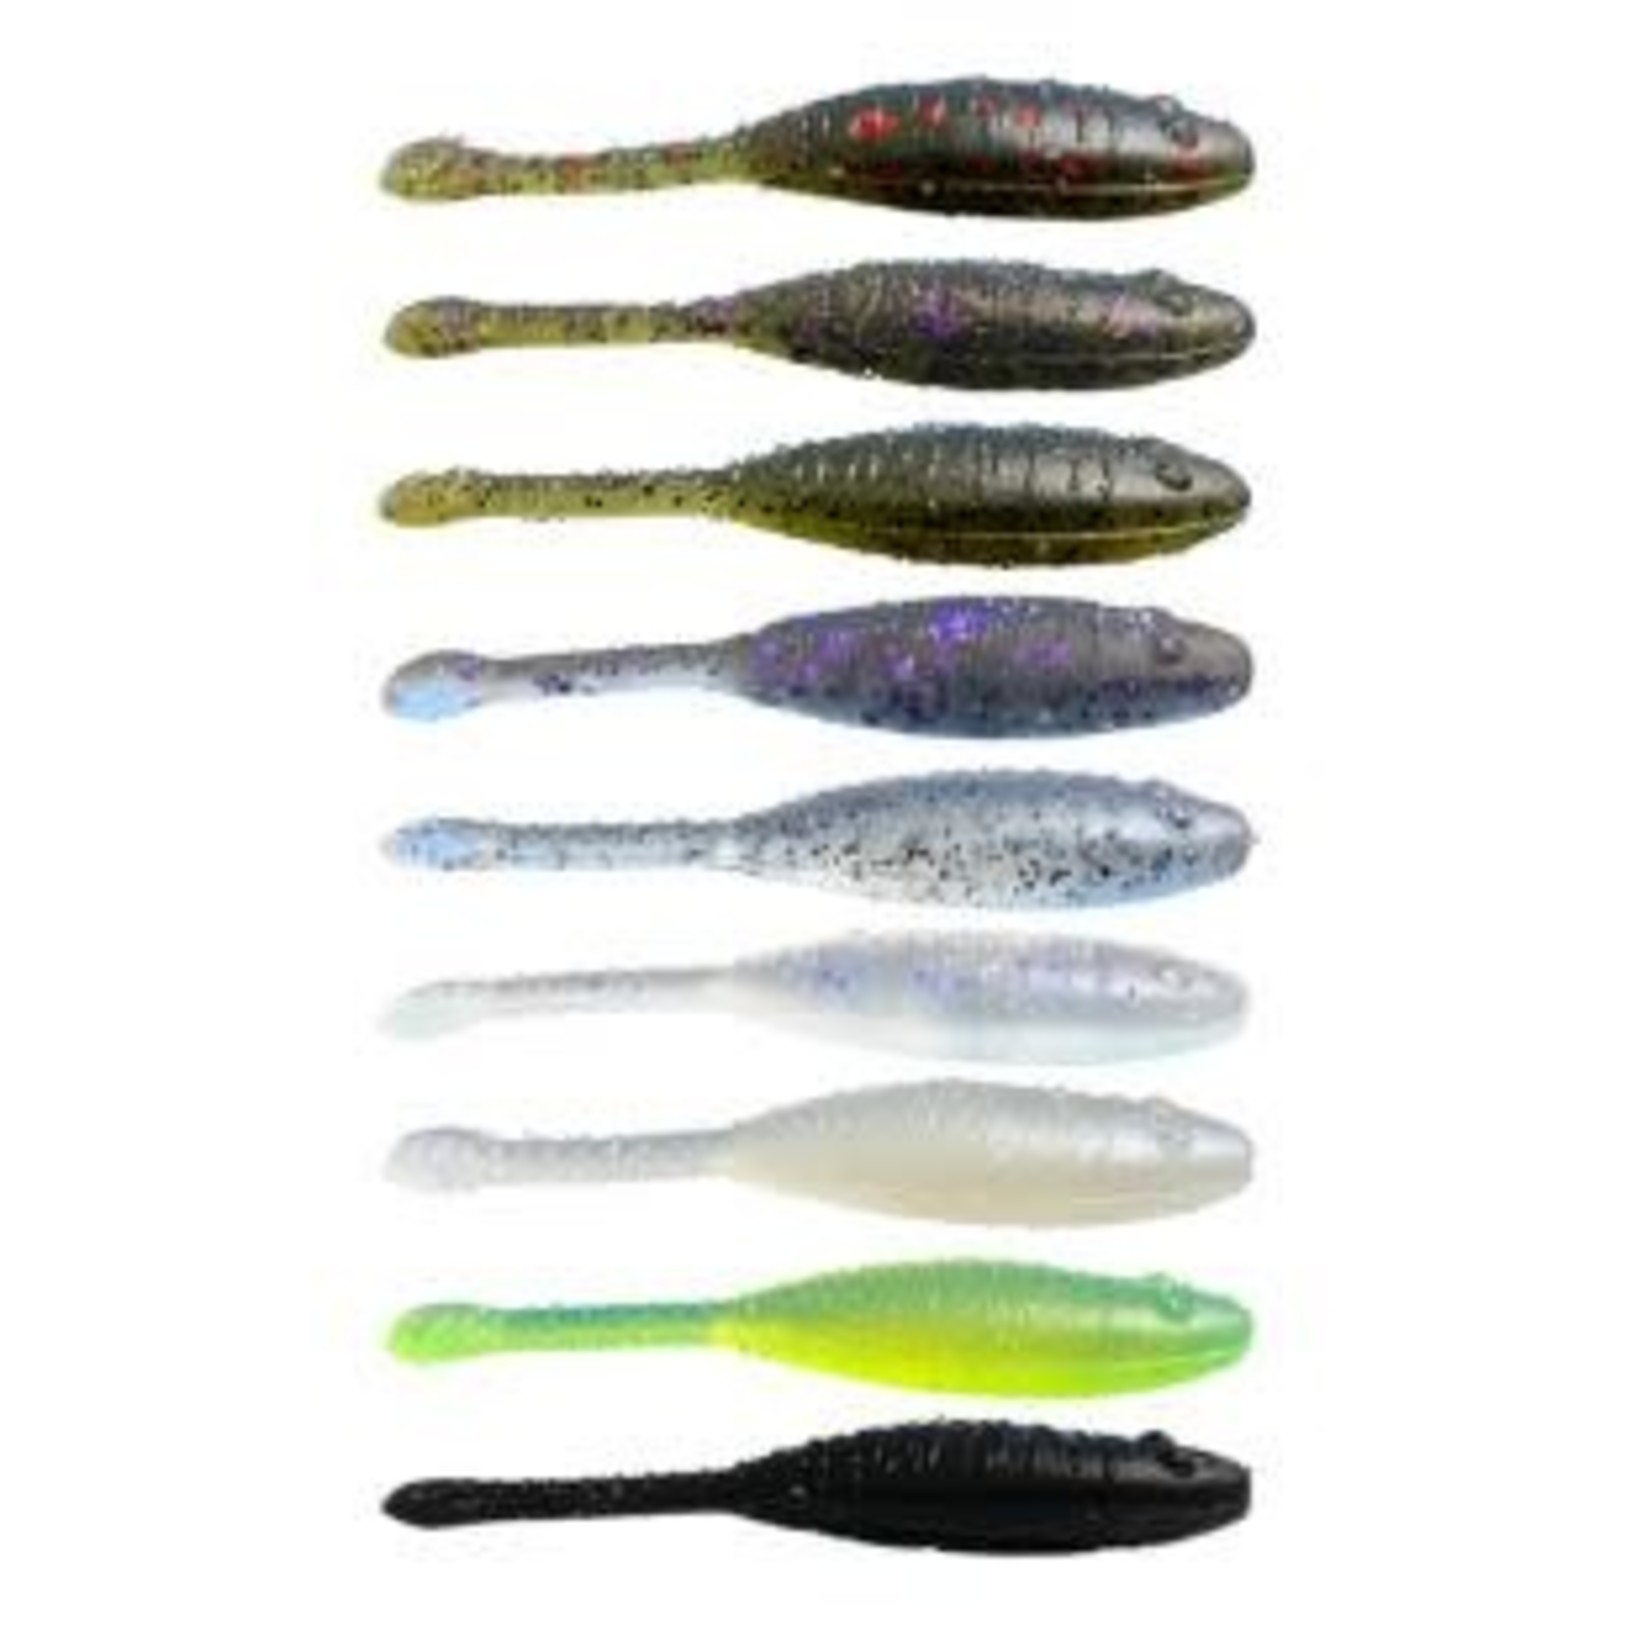 Great Lakes Finesse Great Lakes Finesse 2.25" Flat Cat